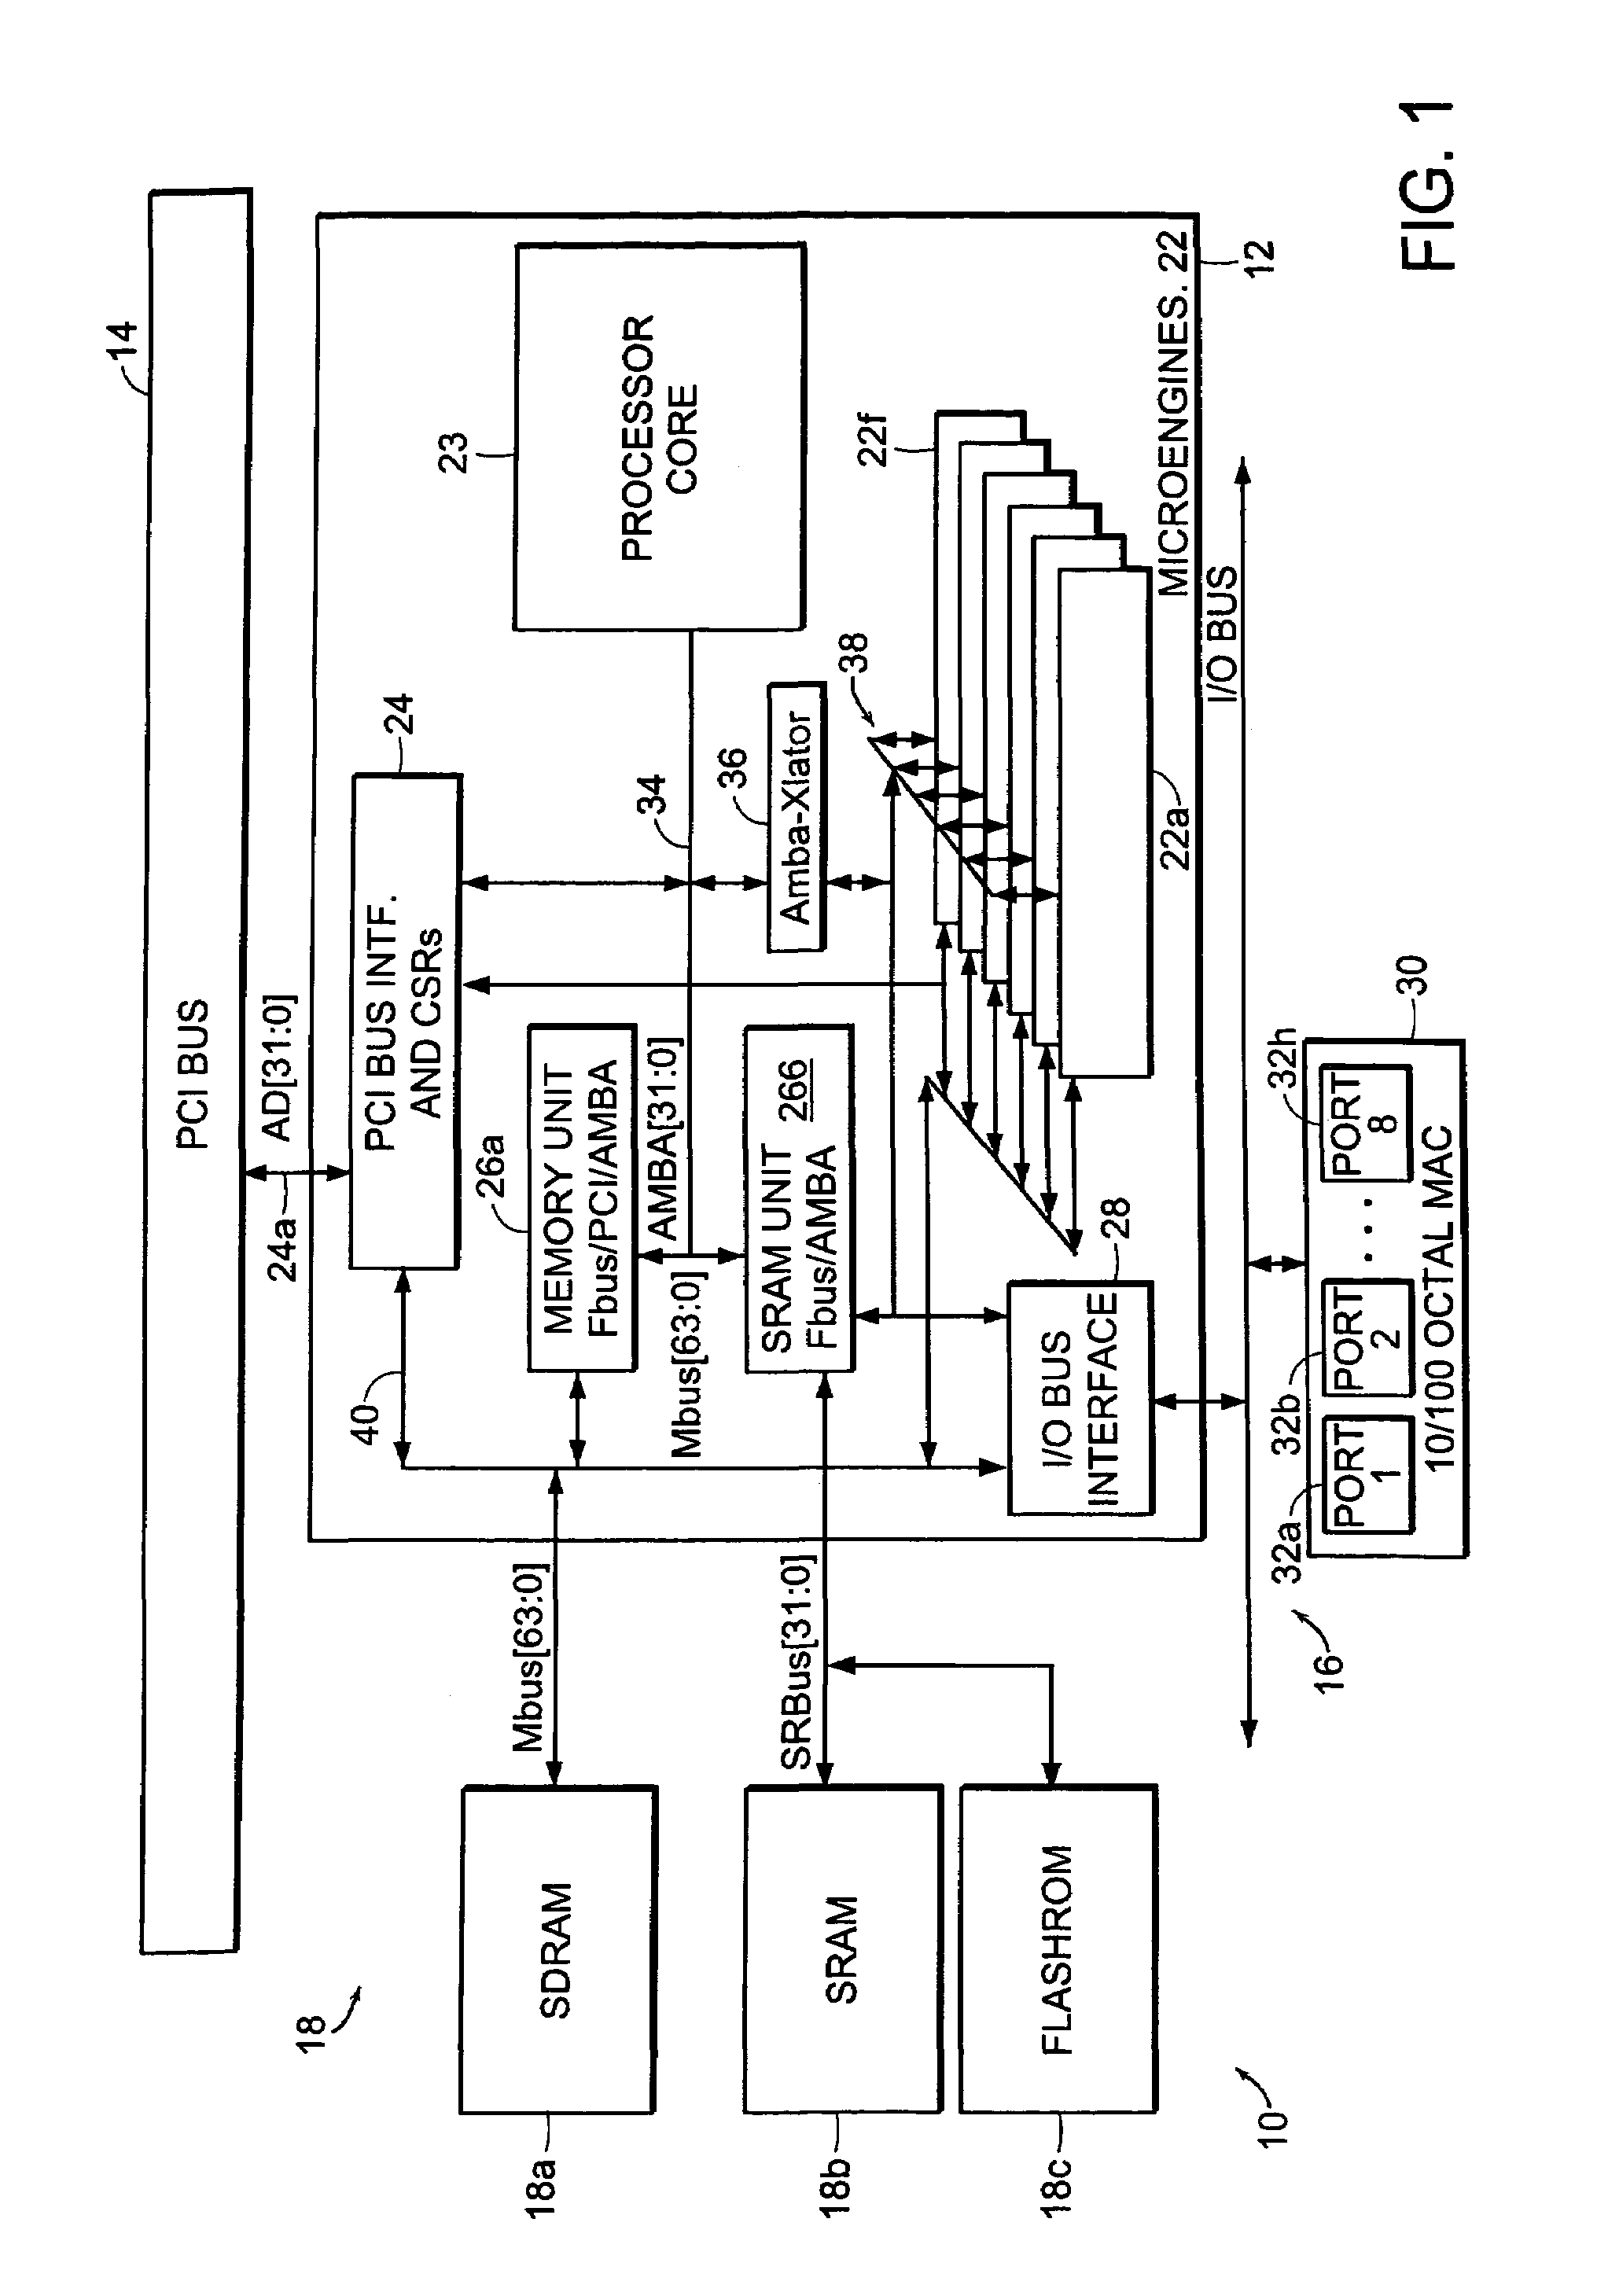 Port blocking technique for maintaining receive packet ordering for a multiple ethernet port switch